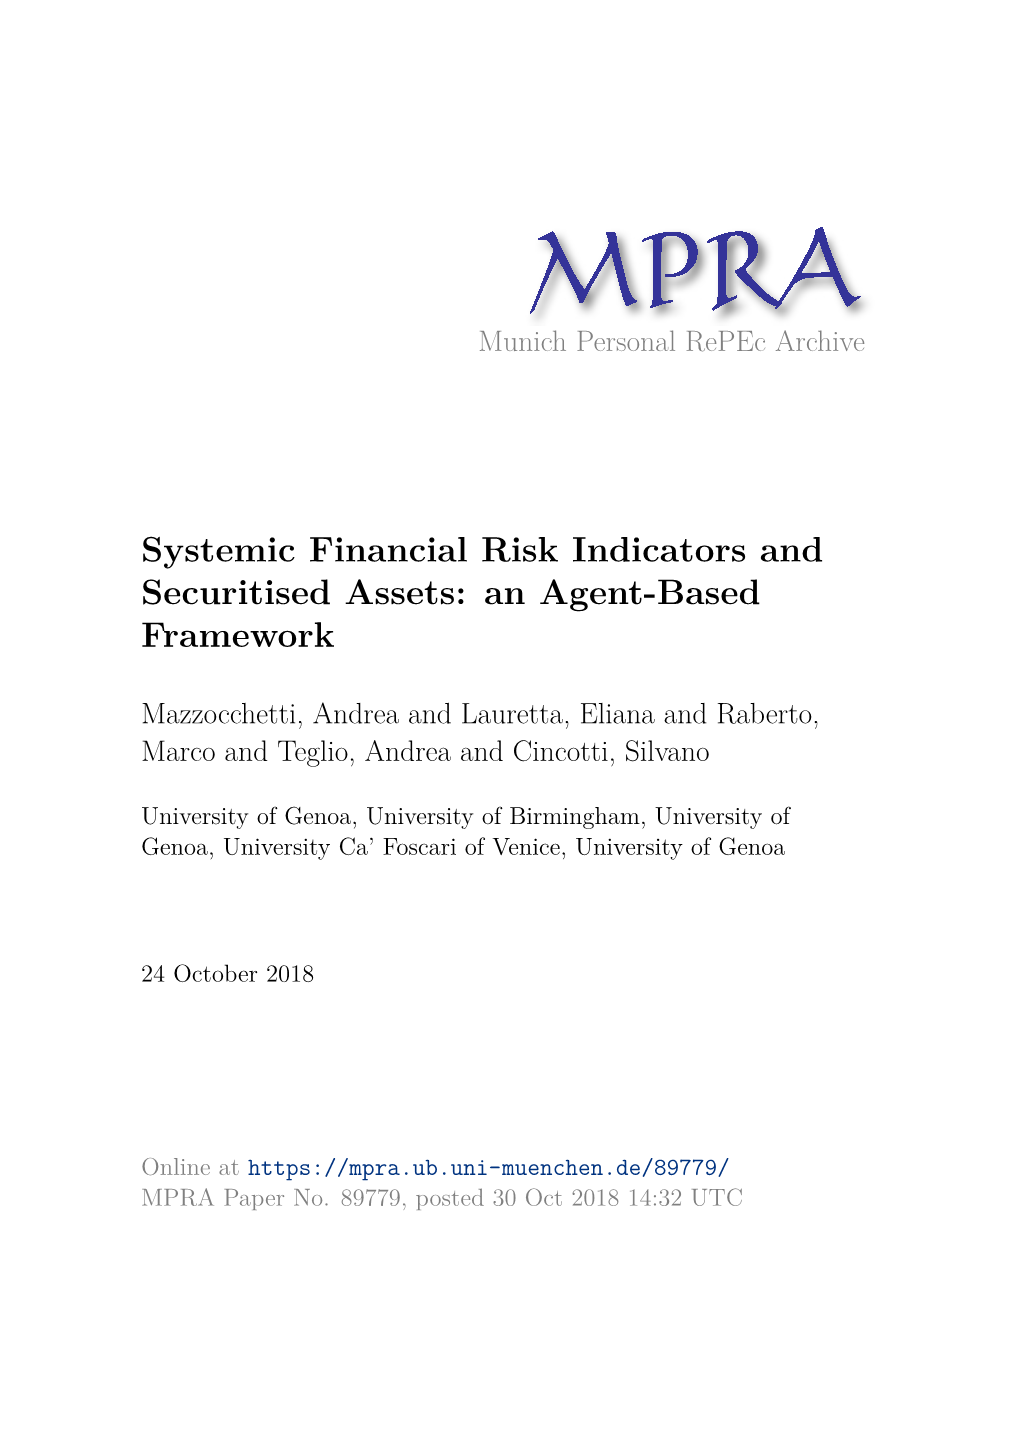 Systemic Financial Risk Indicators and Securitised Assets: an Agent-Based Framework